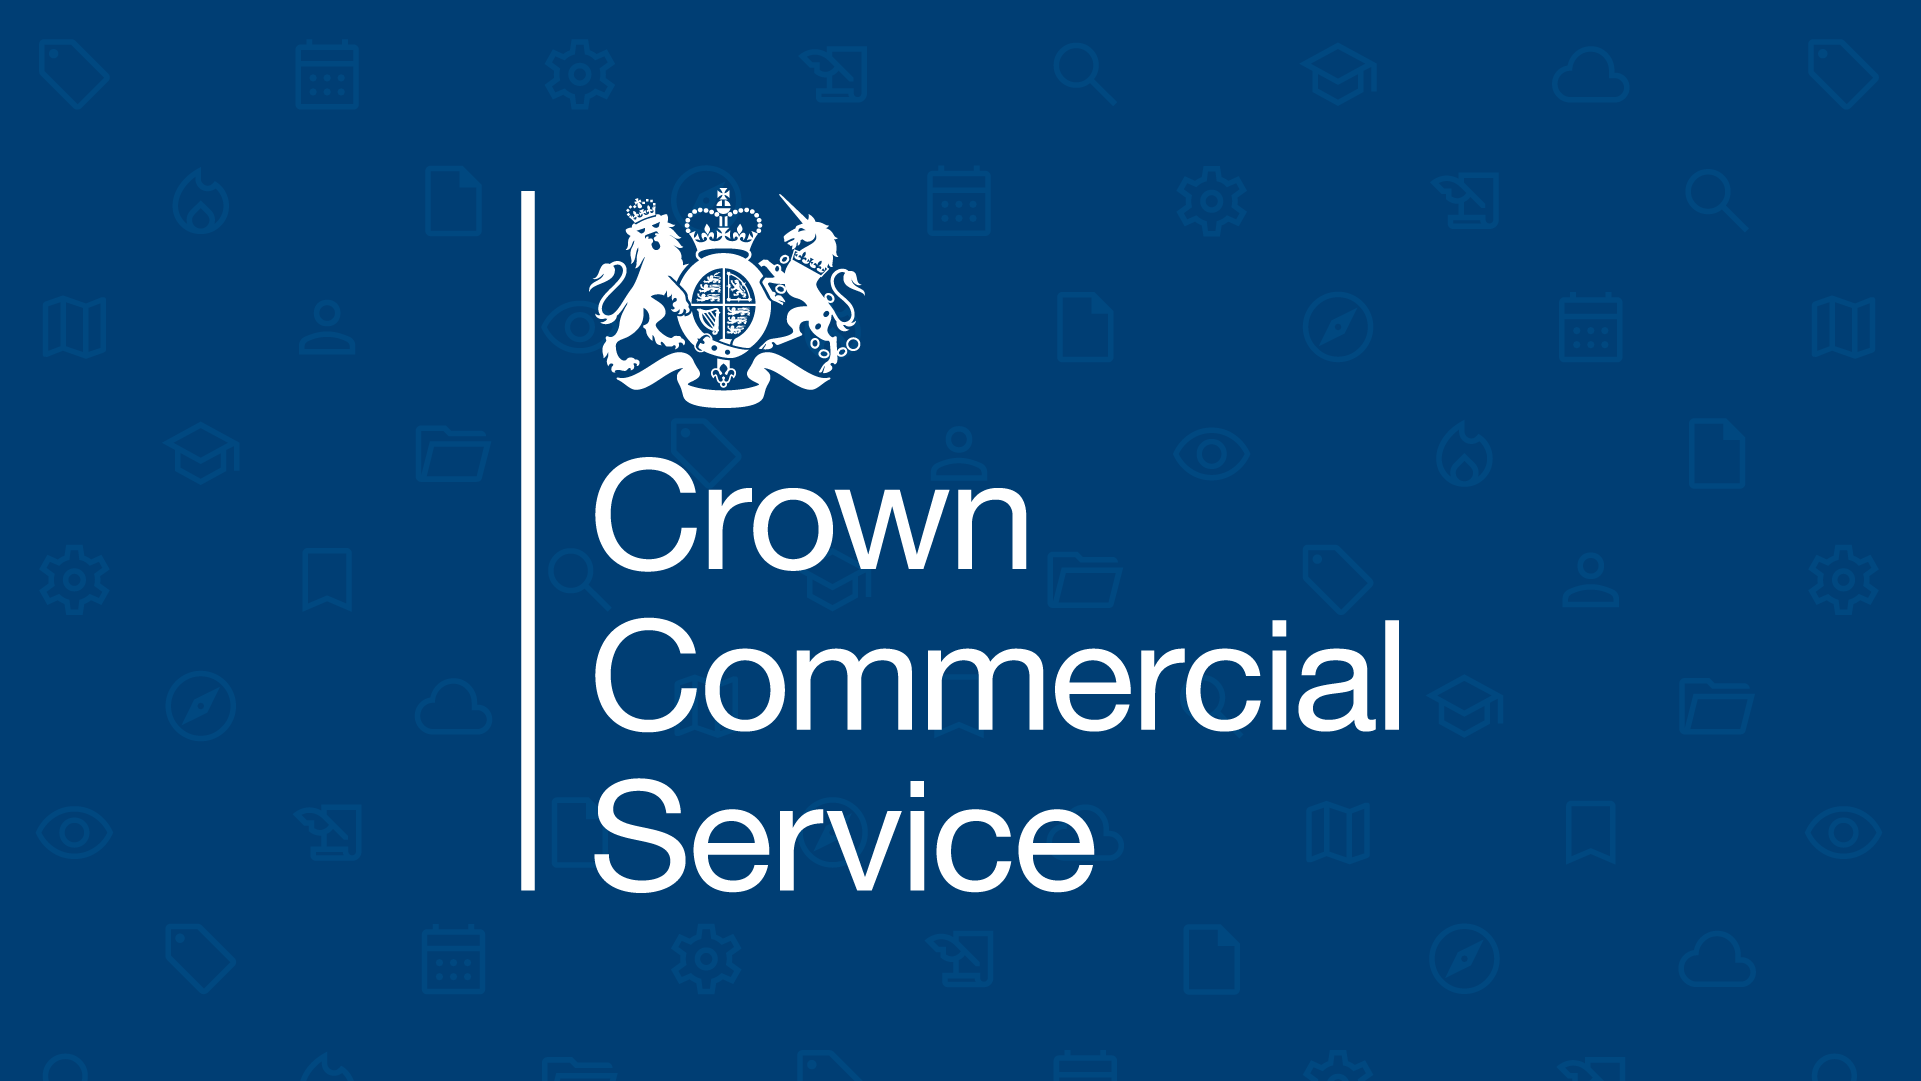 The Crown Commerial Service logo on a blue background that is adorned with icons related to the Sofia application.